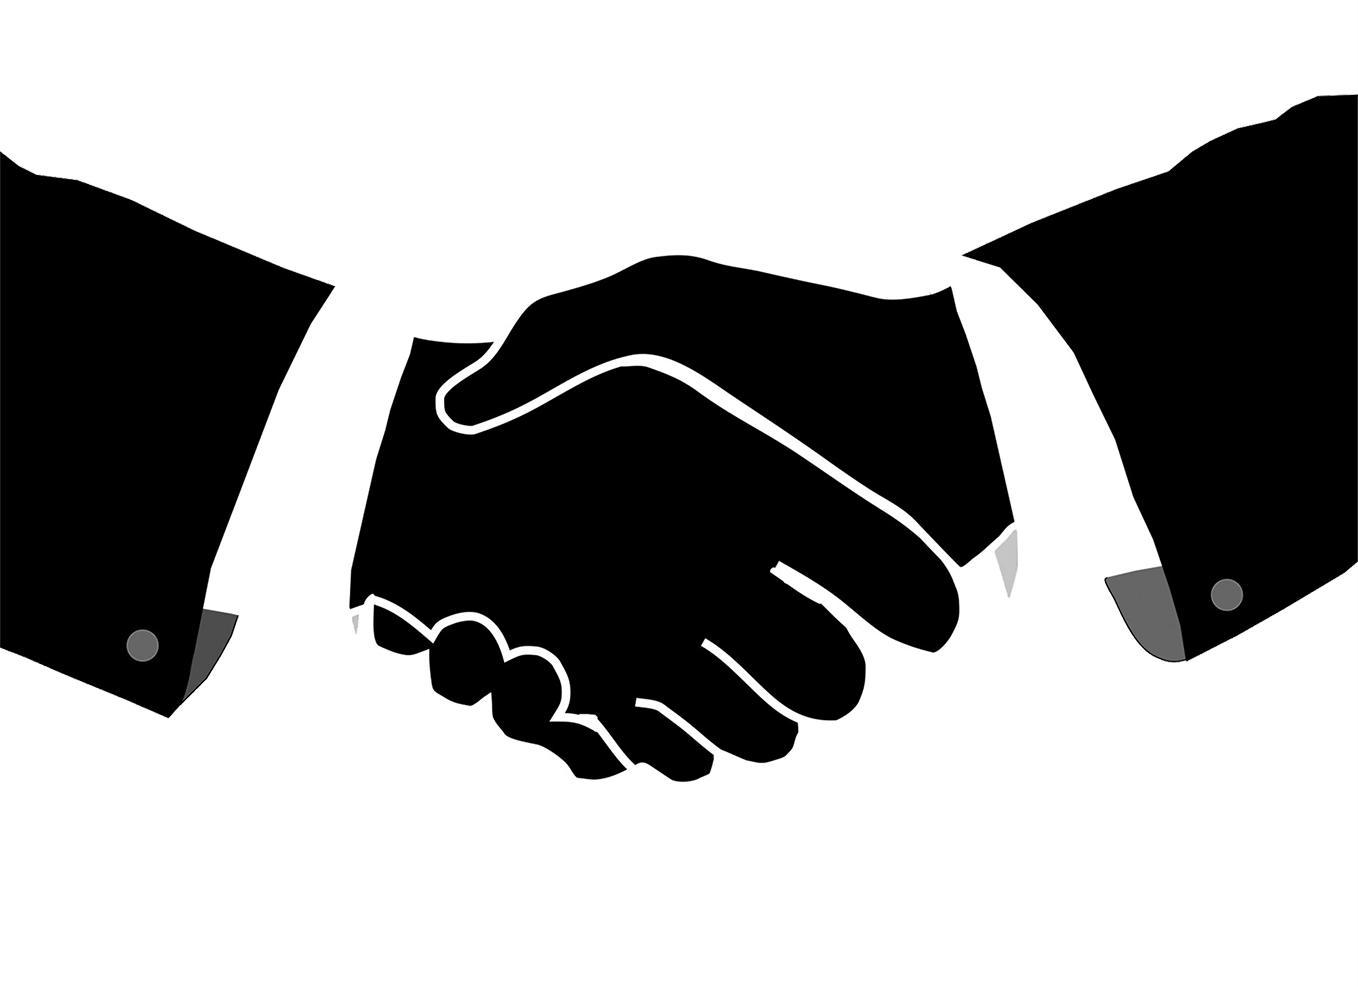 Handshake clipart animated. Hands shaking cliparts free